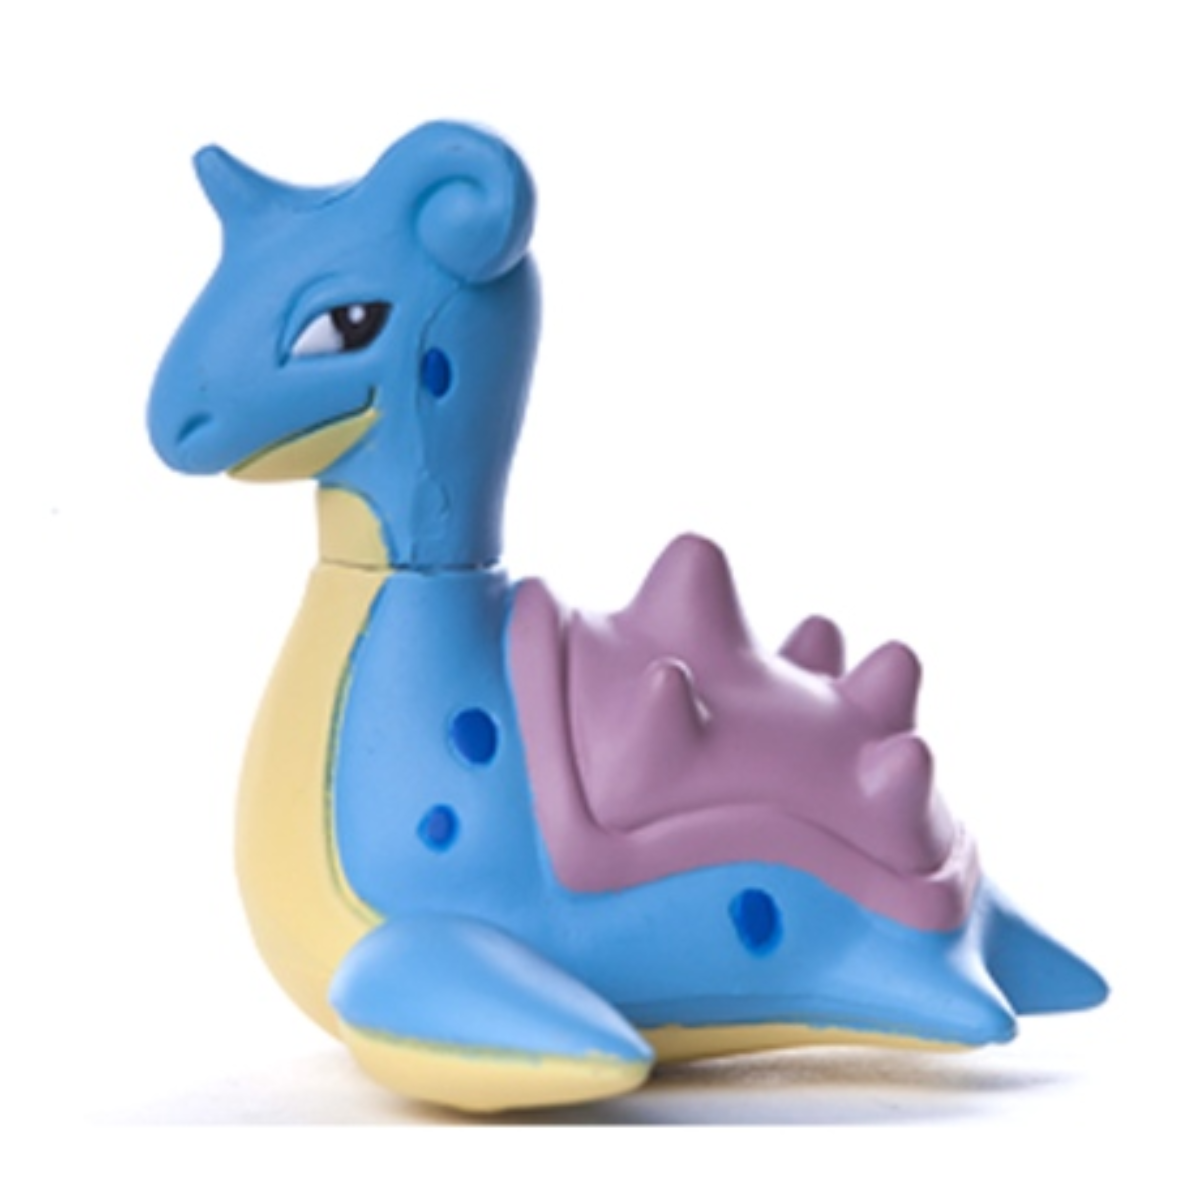 Pokemon Moncolle &quot;Lapras&quot; (MS-65)-Takara Tomy-Ace Cards &amp; Collectibles